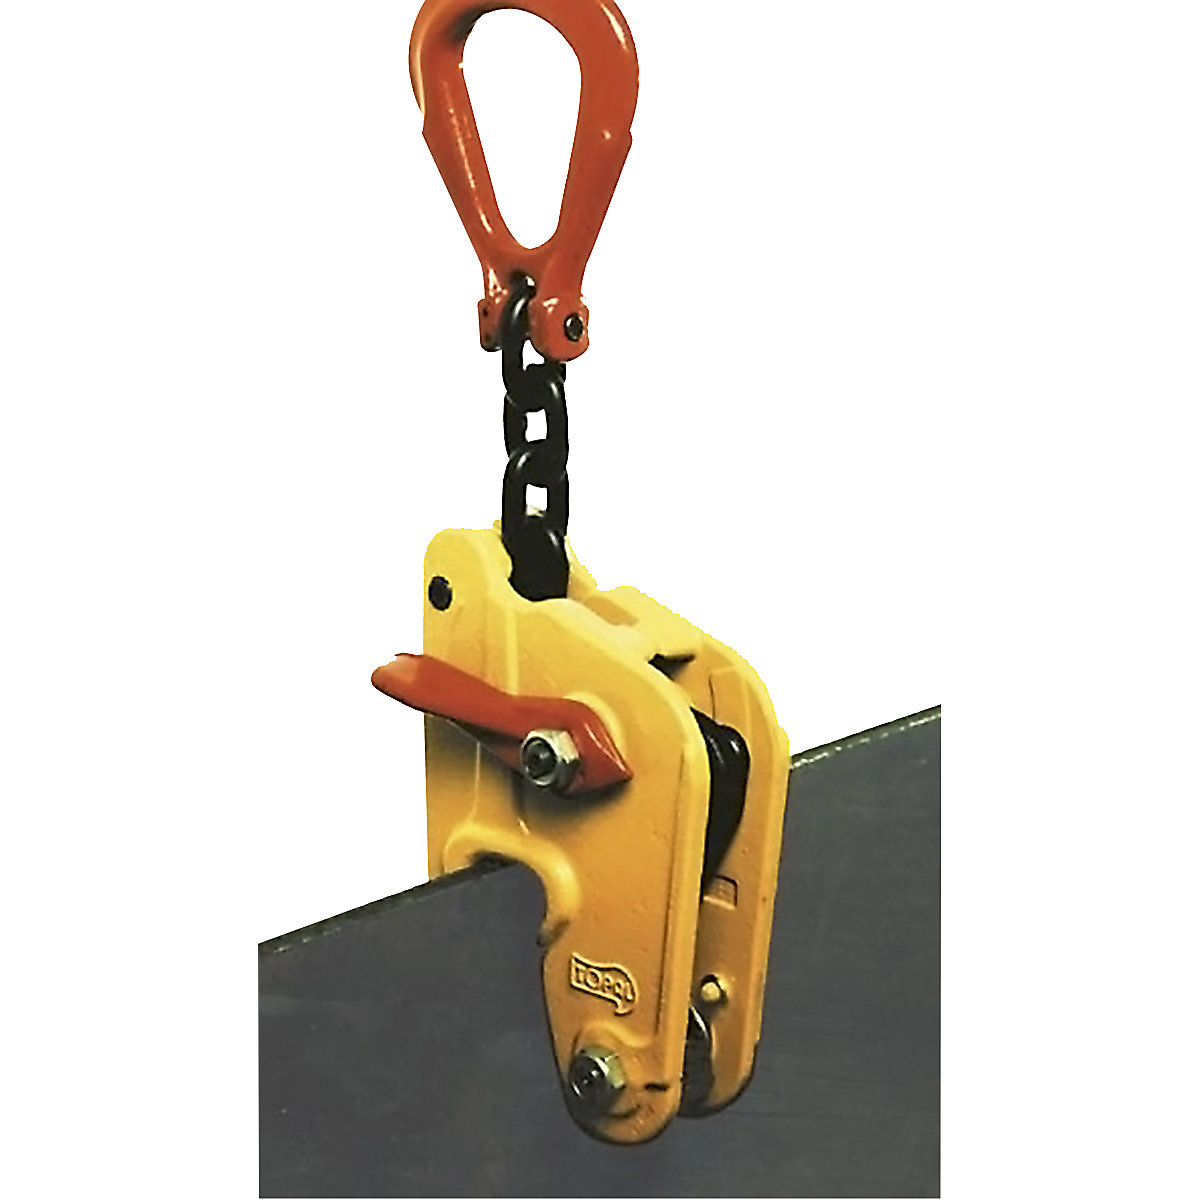 NK 1 plate clamp